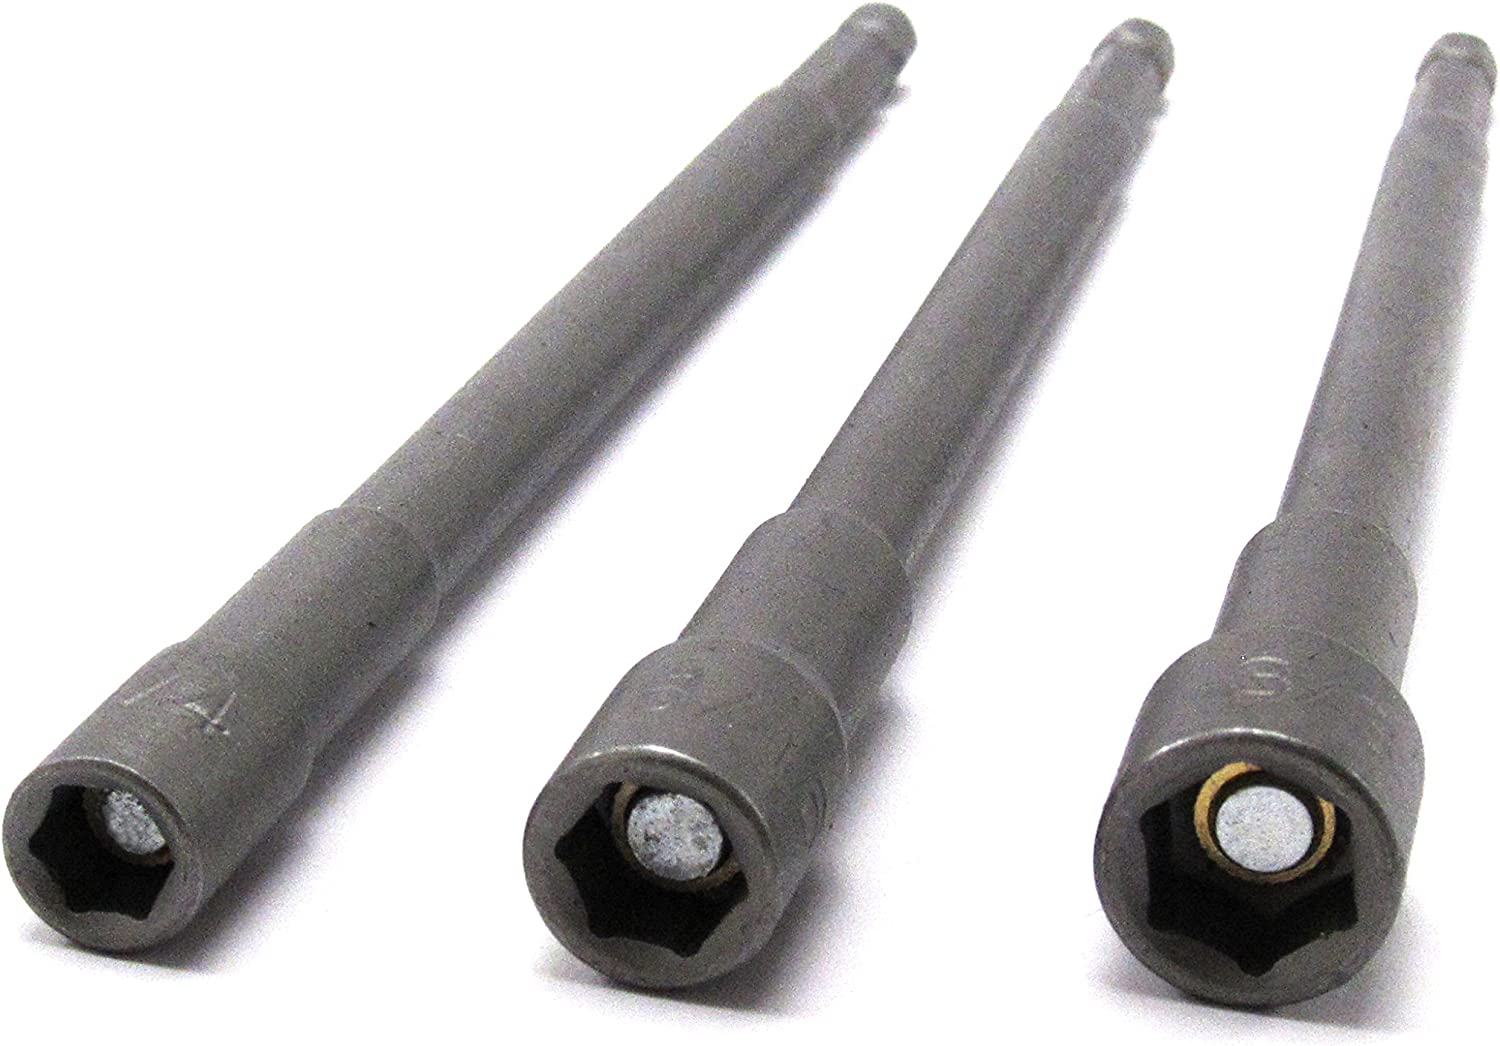 3 pc 6" Long Magnetic Nut Setter Sizes: 1/4",5/16" and 3/4" 3